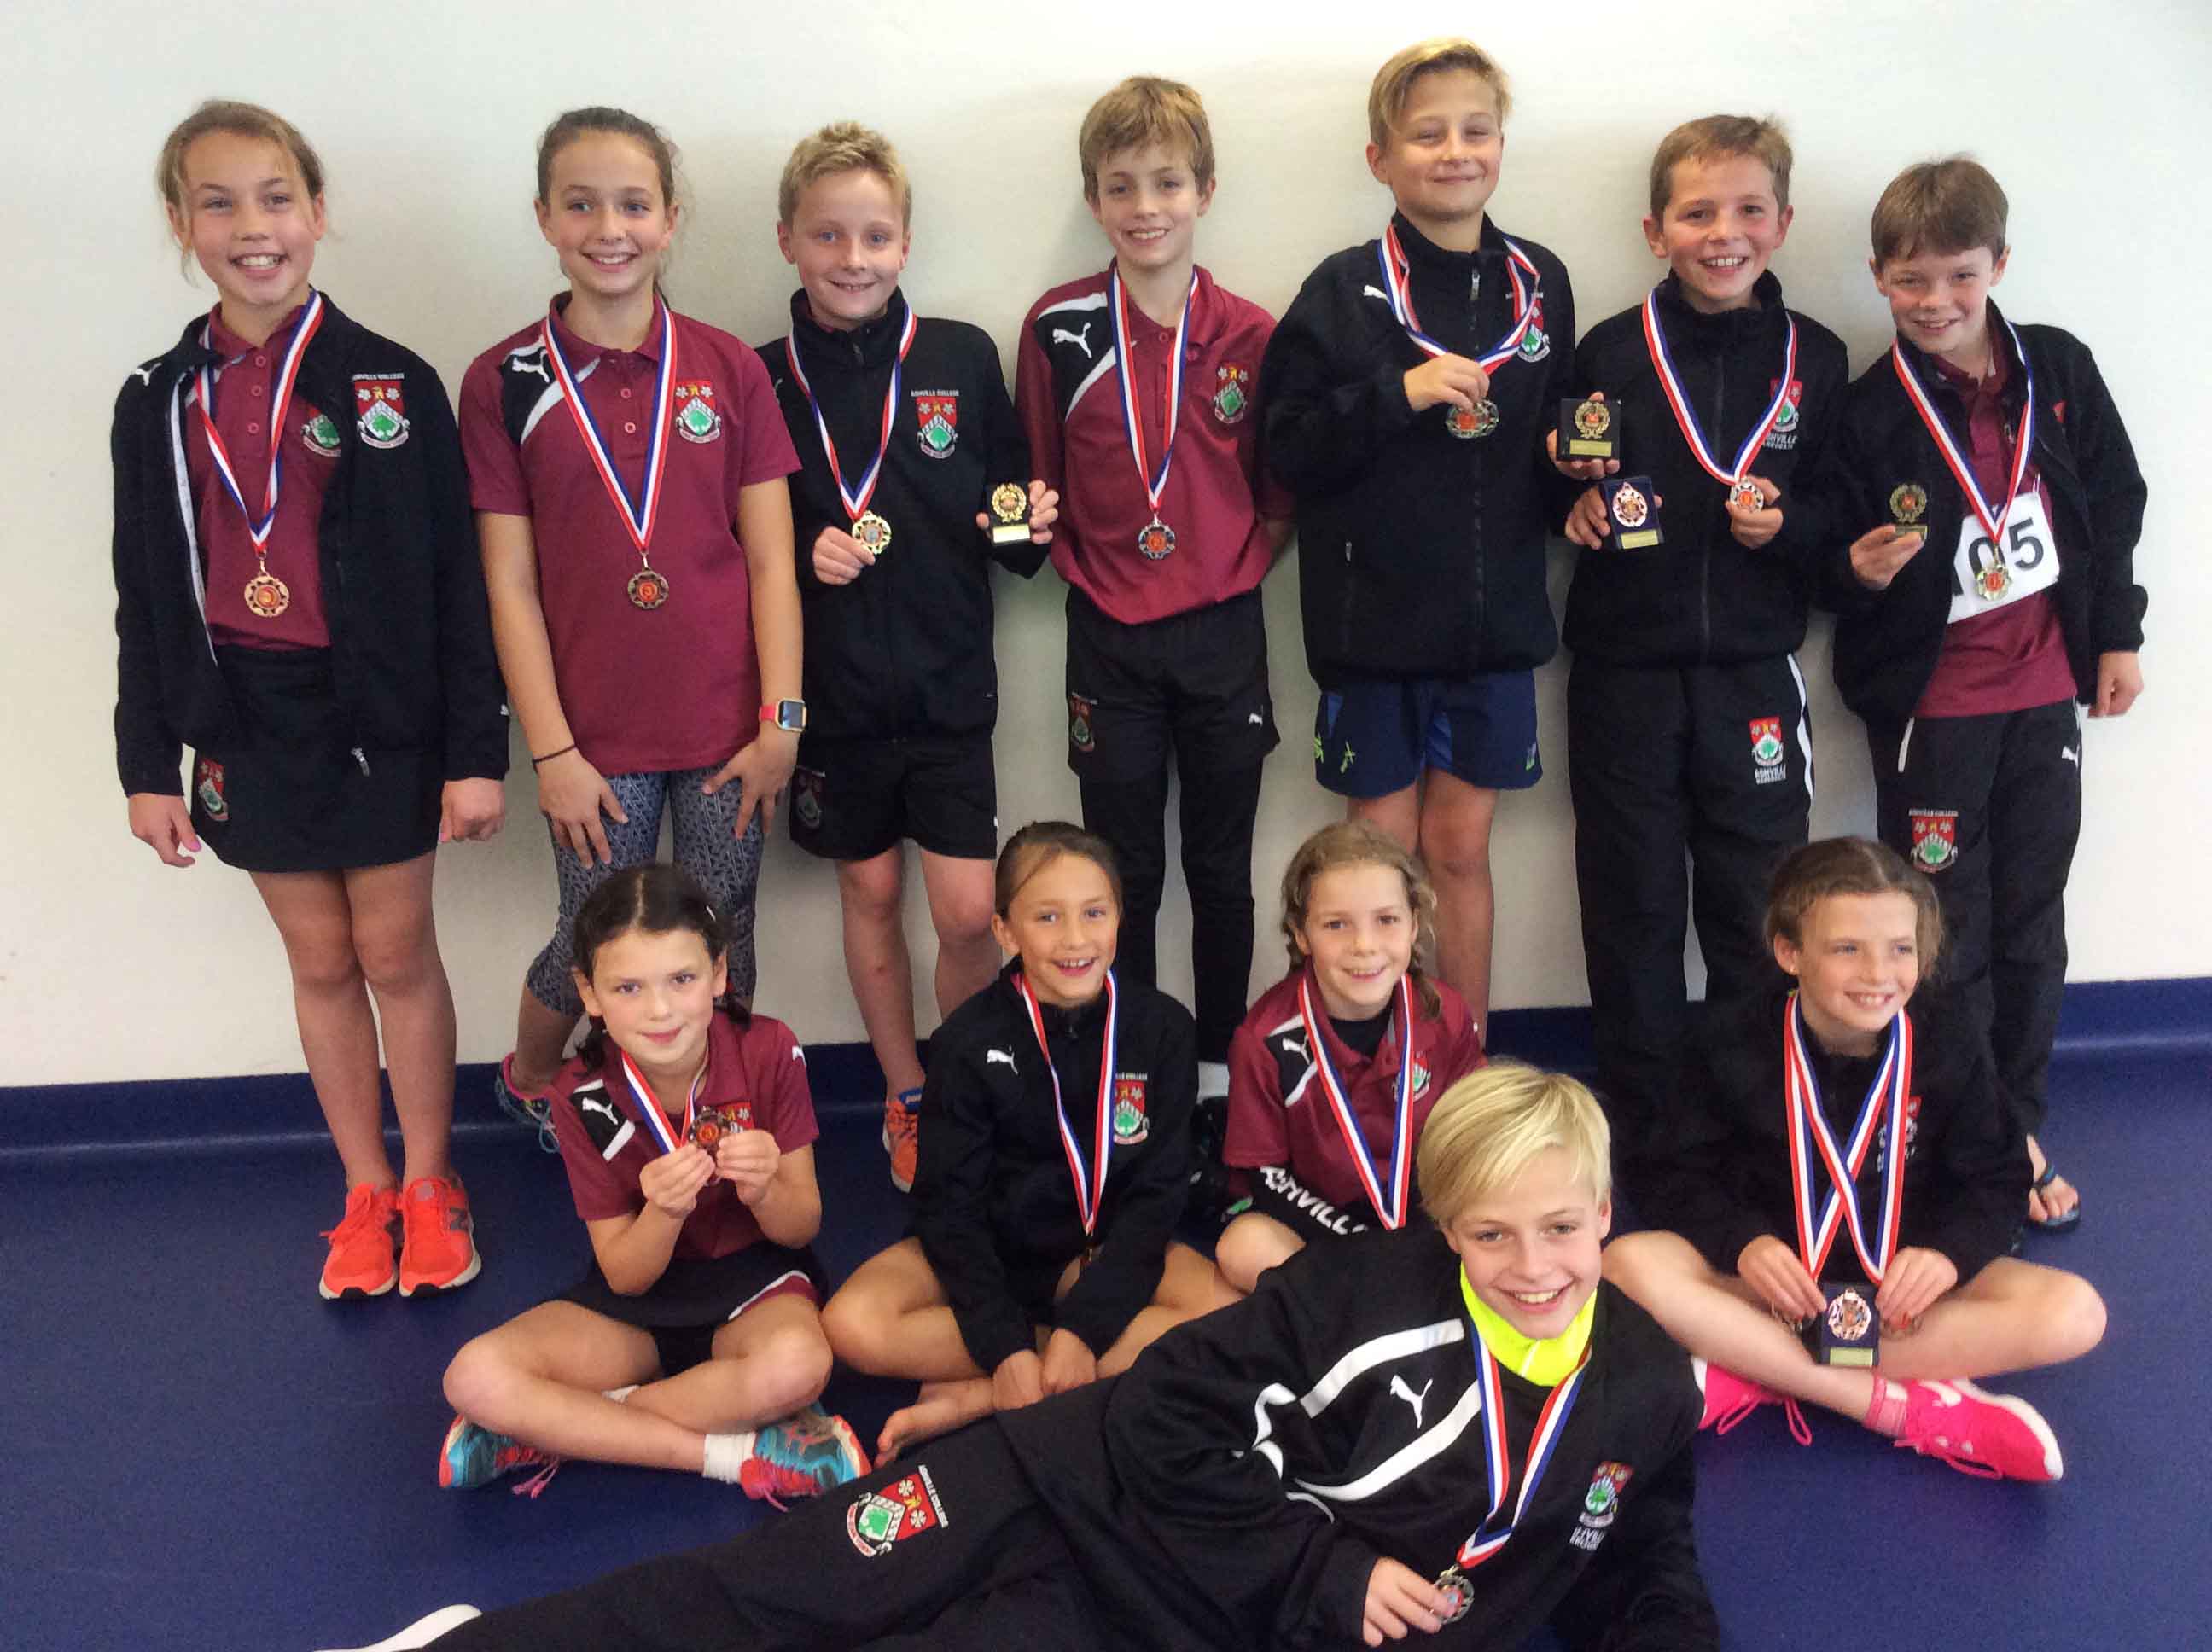 Sporting Stars! The Biathlon winners from Ashville show off their medals and awards